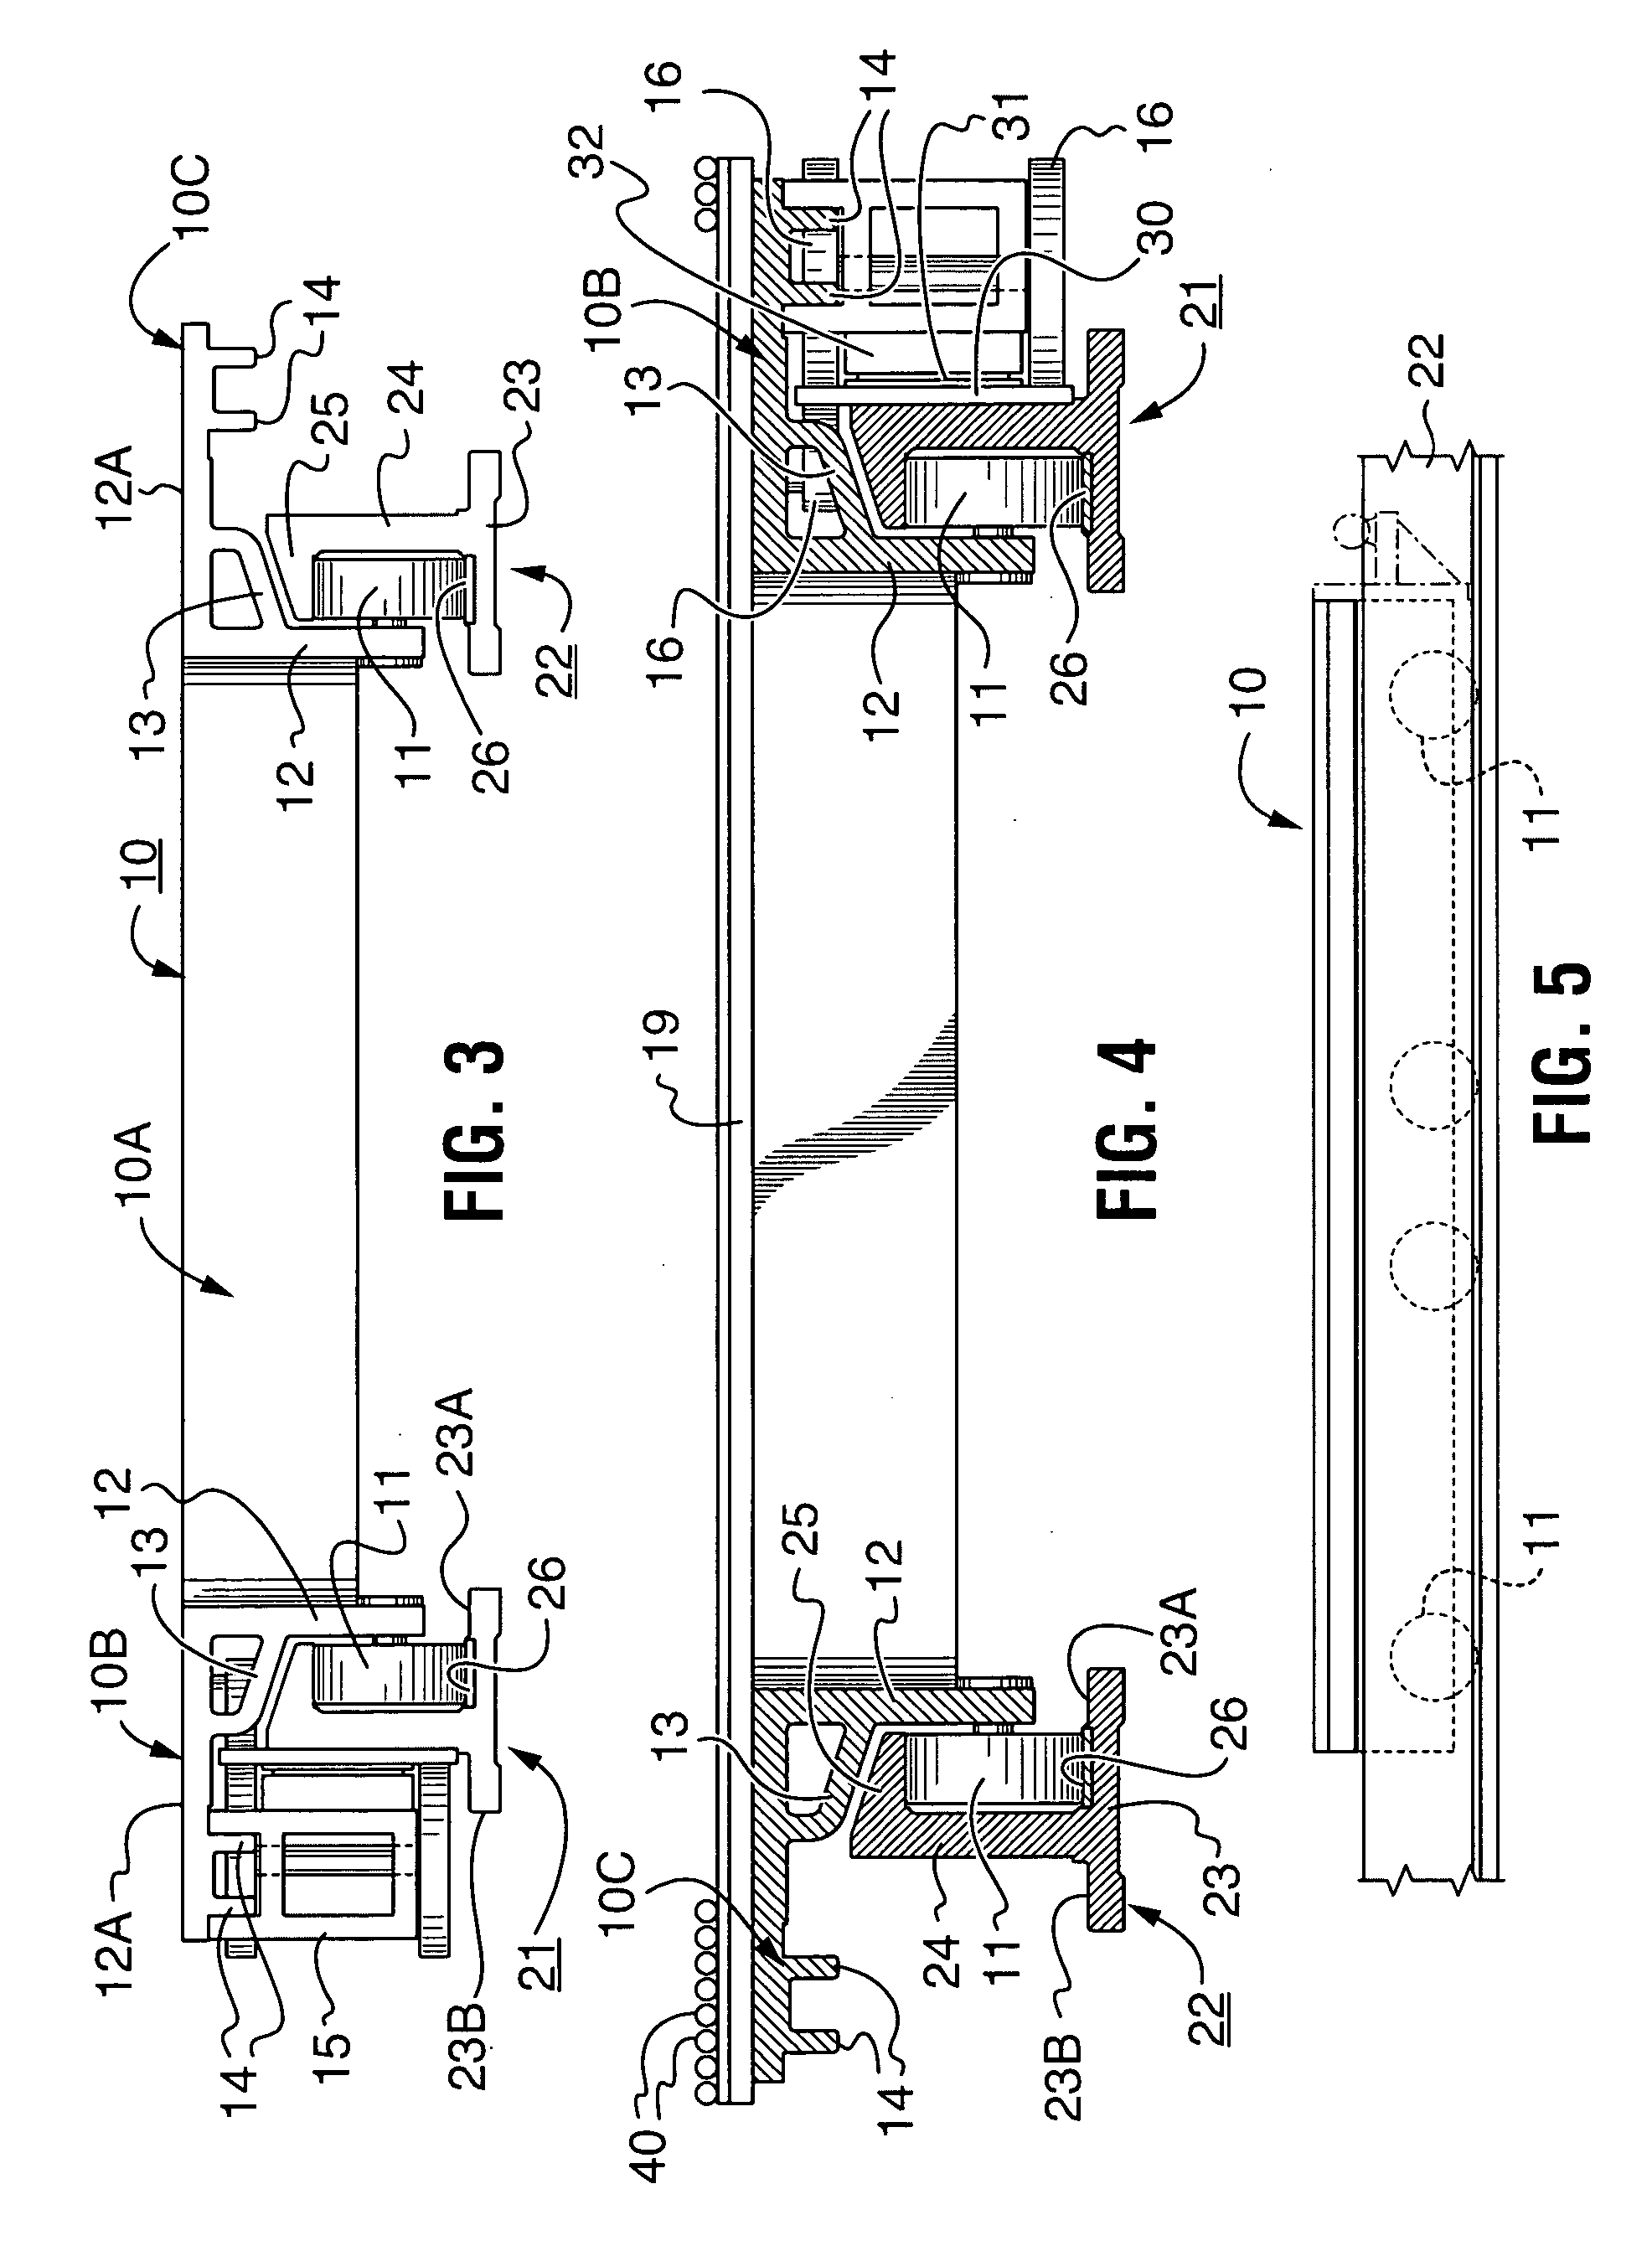 Rail carriage and rail carriage system